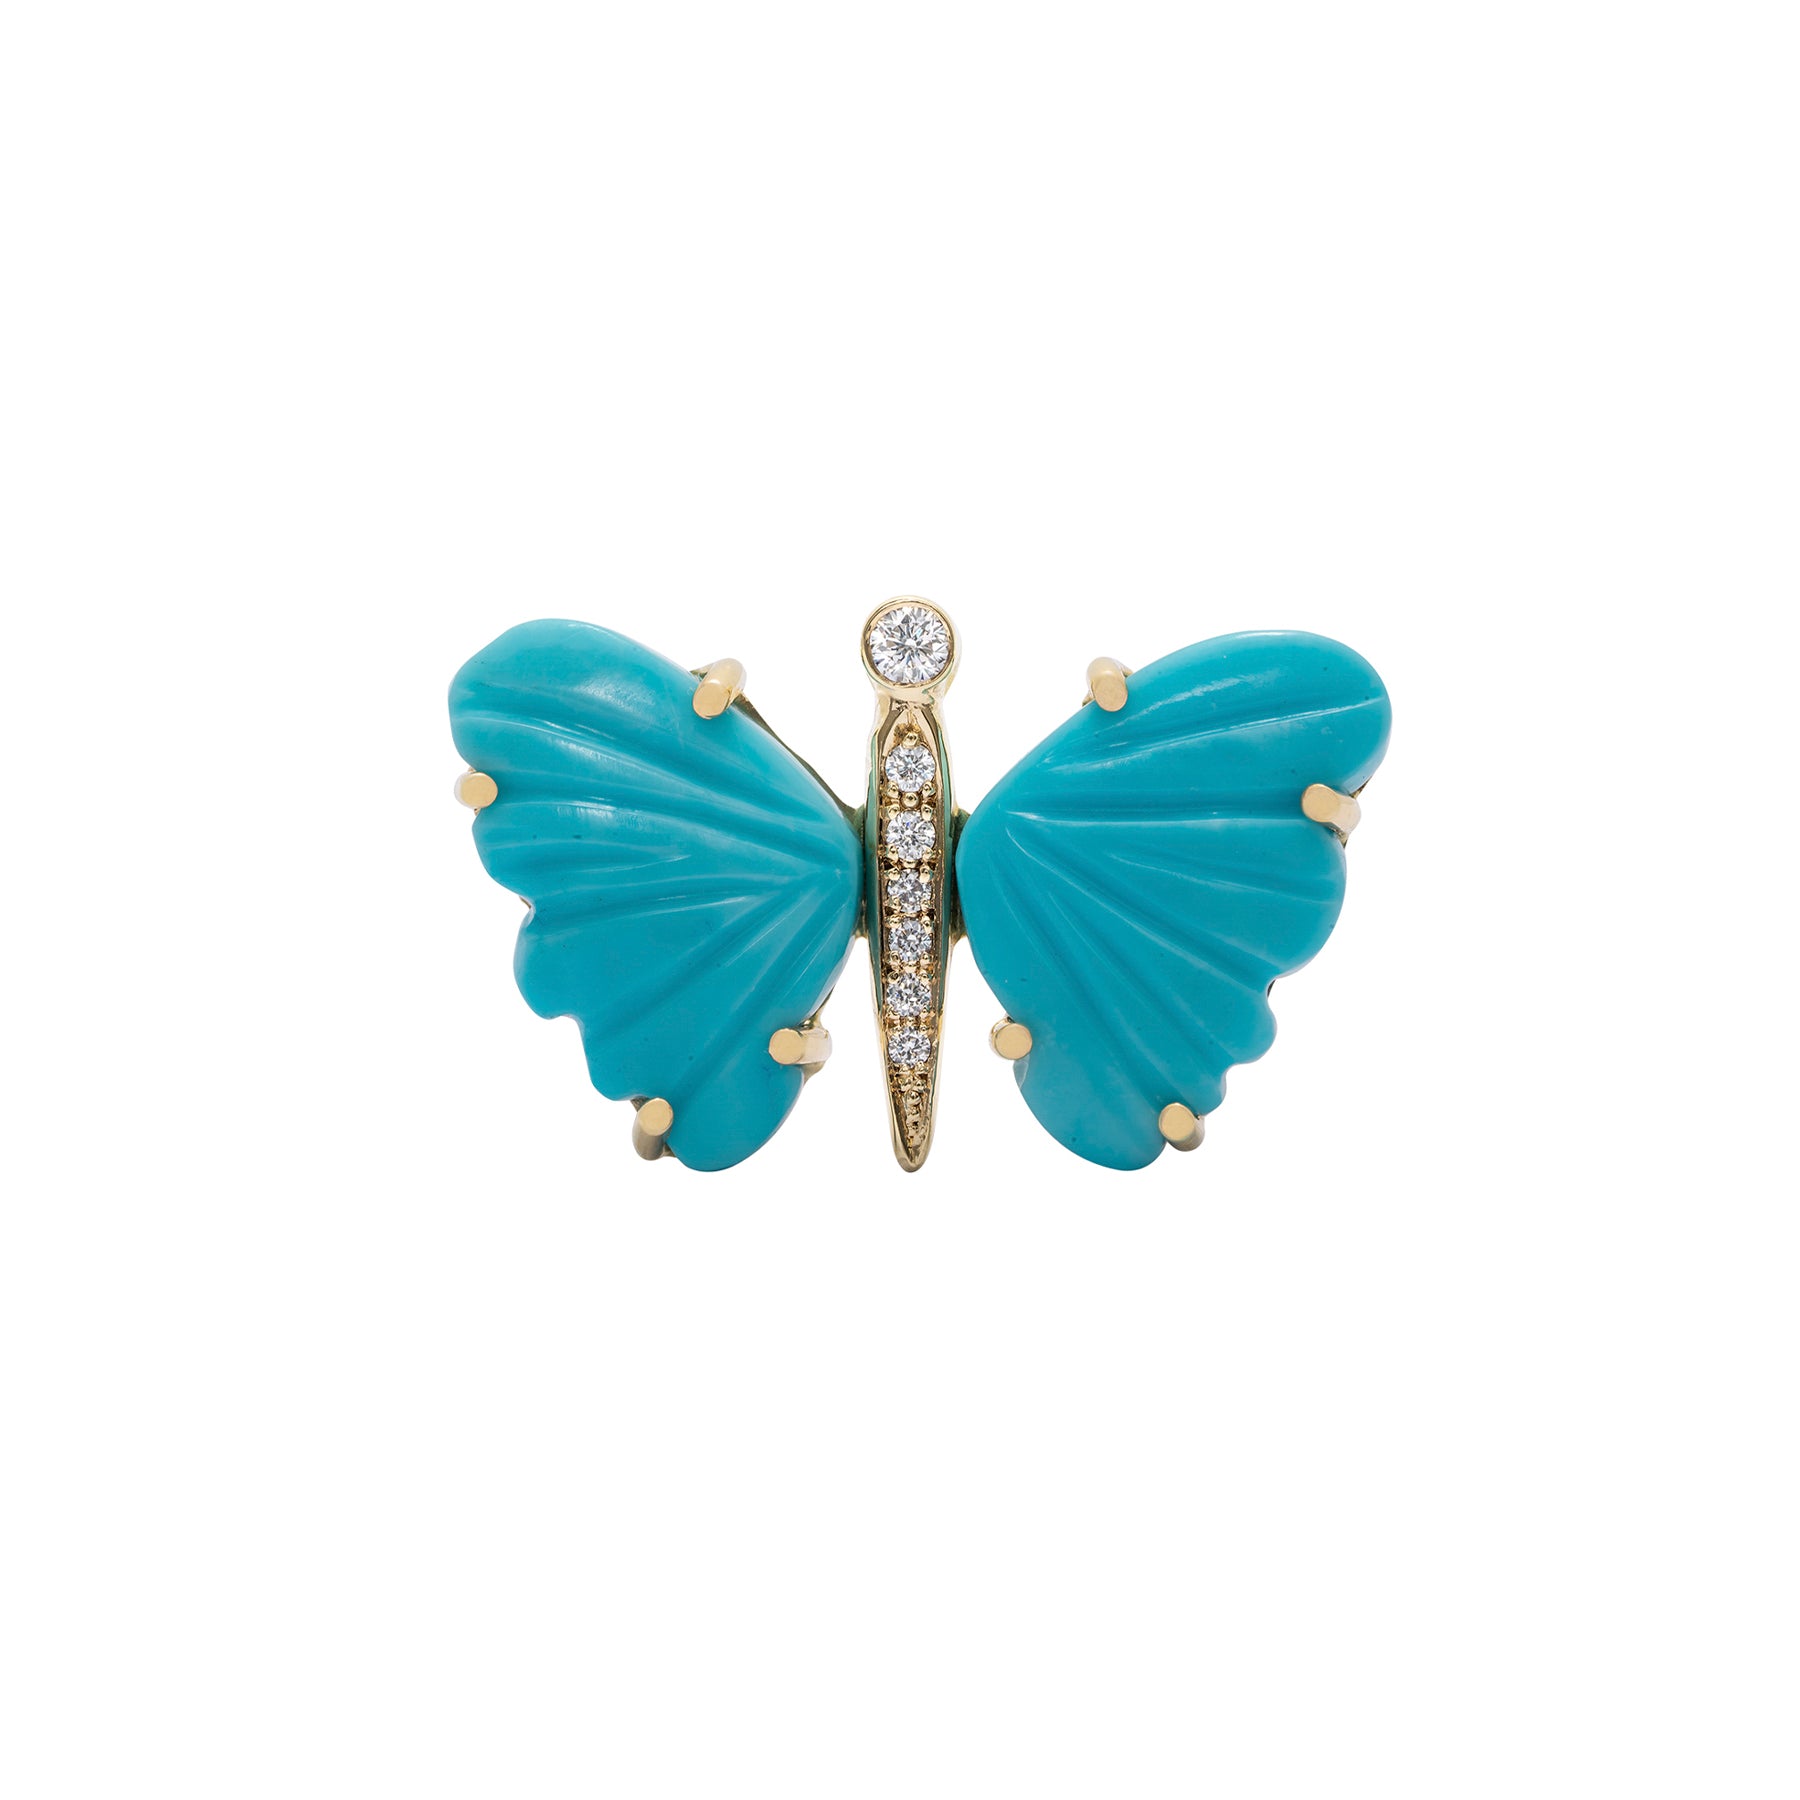 Medium Turquoise Butterfly ring - Nina Segal Jewelry